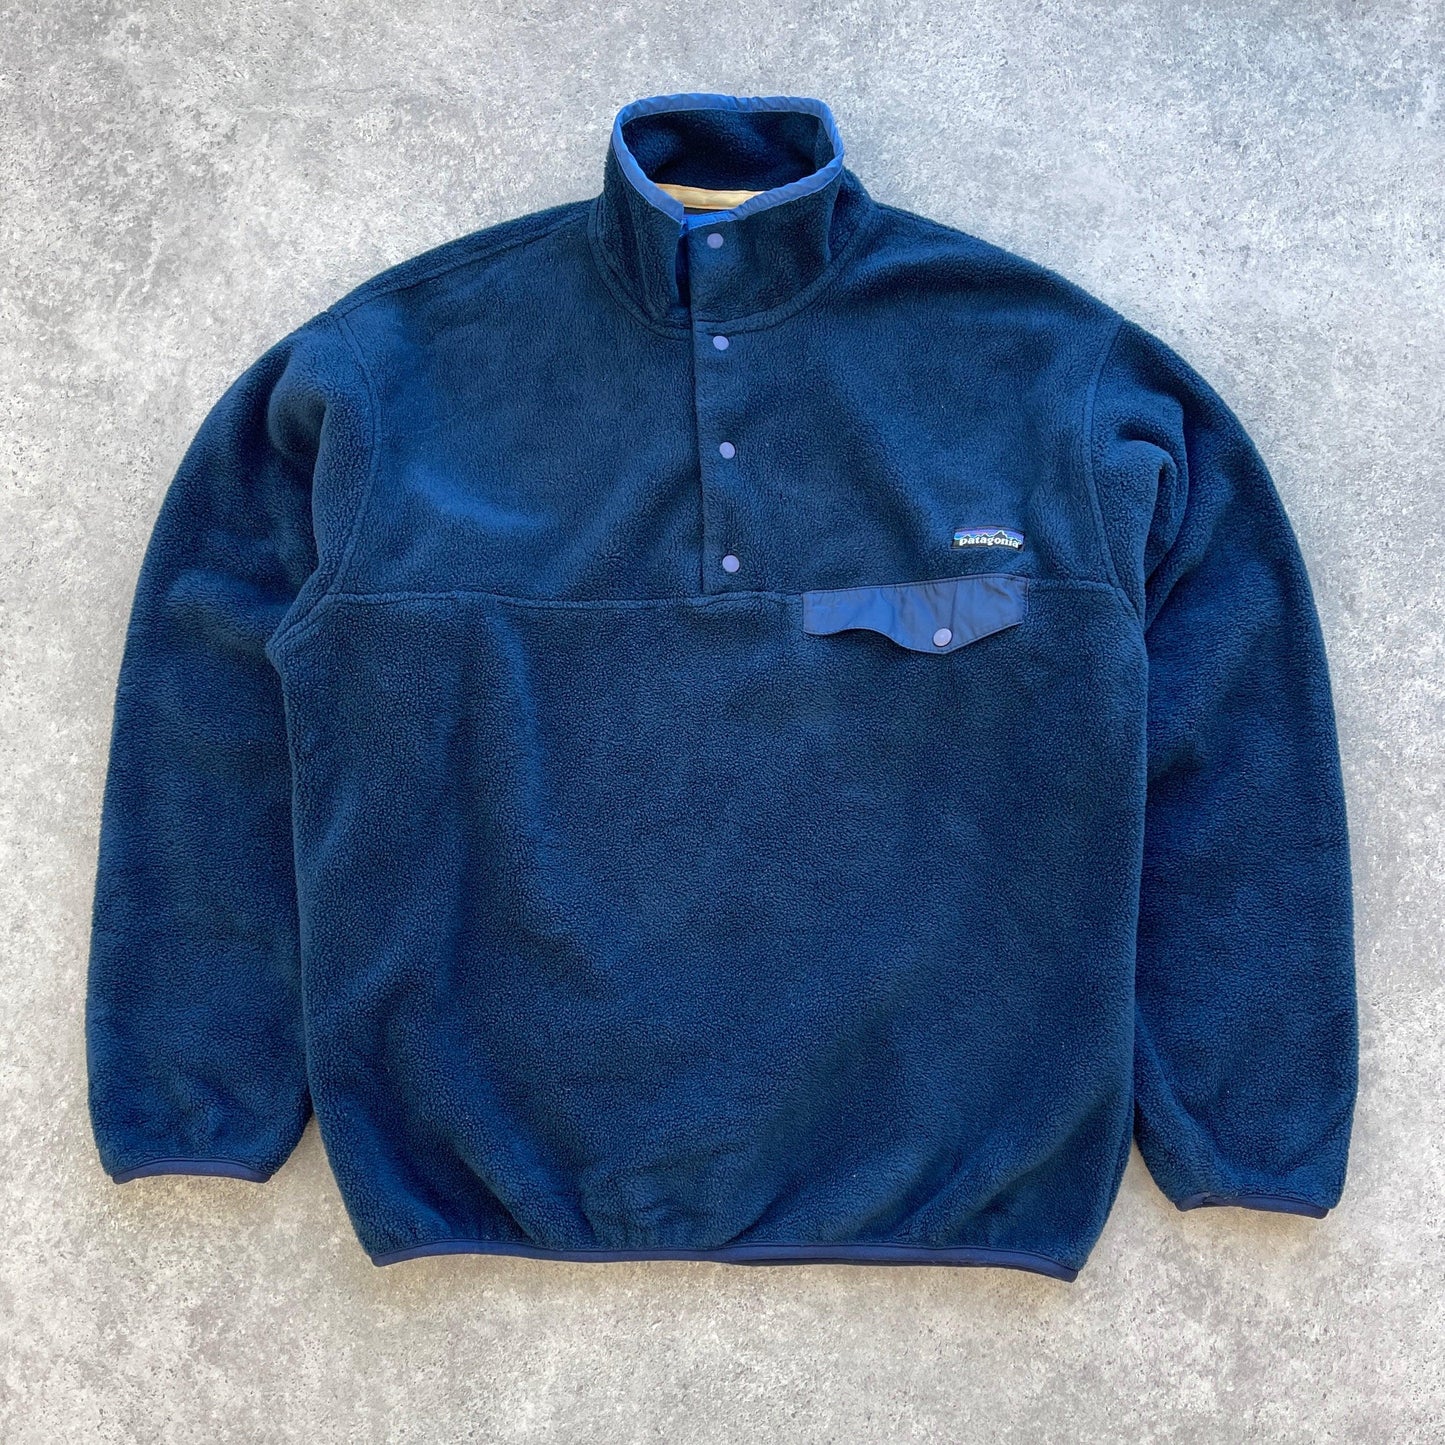 Patagonia Synchilla Snap-T pullover fleece (M) - Known Source